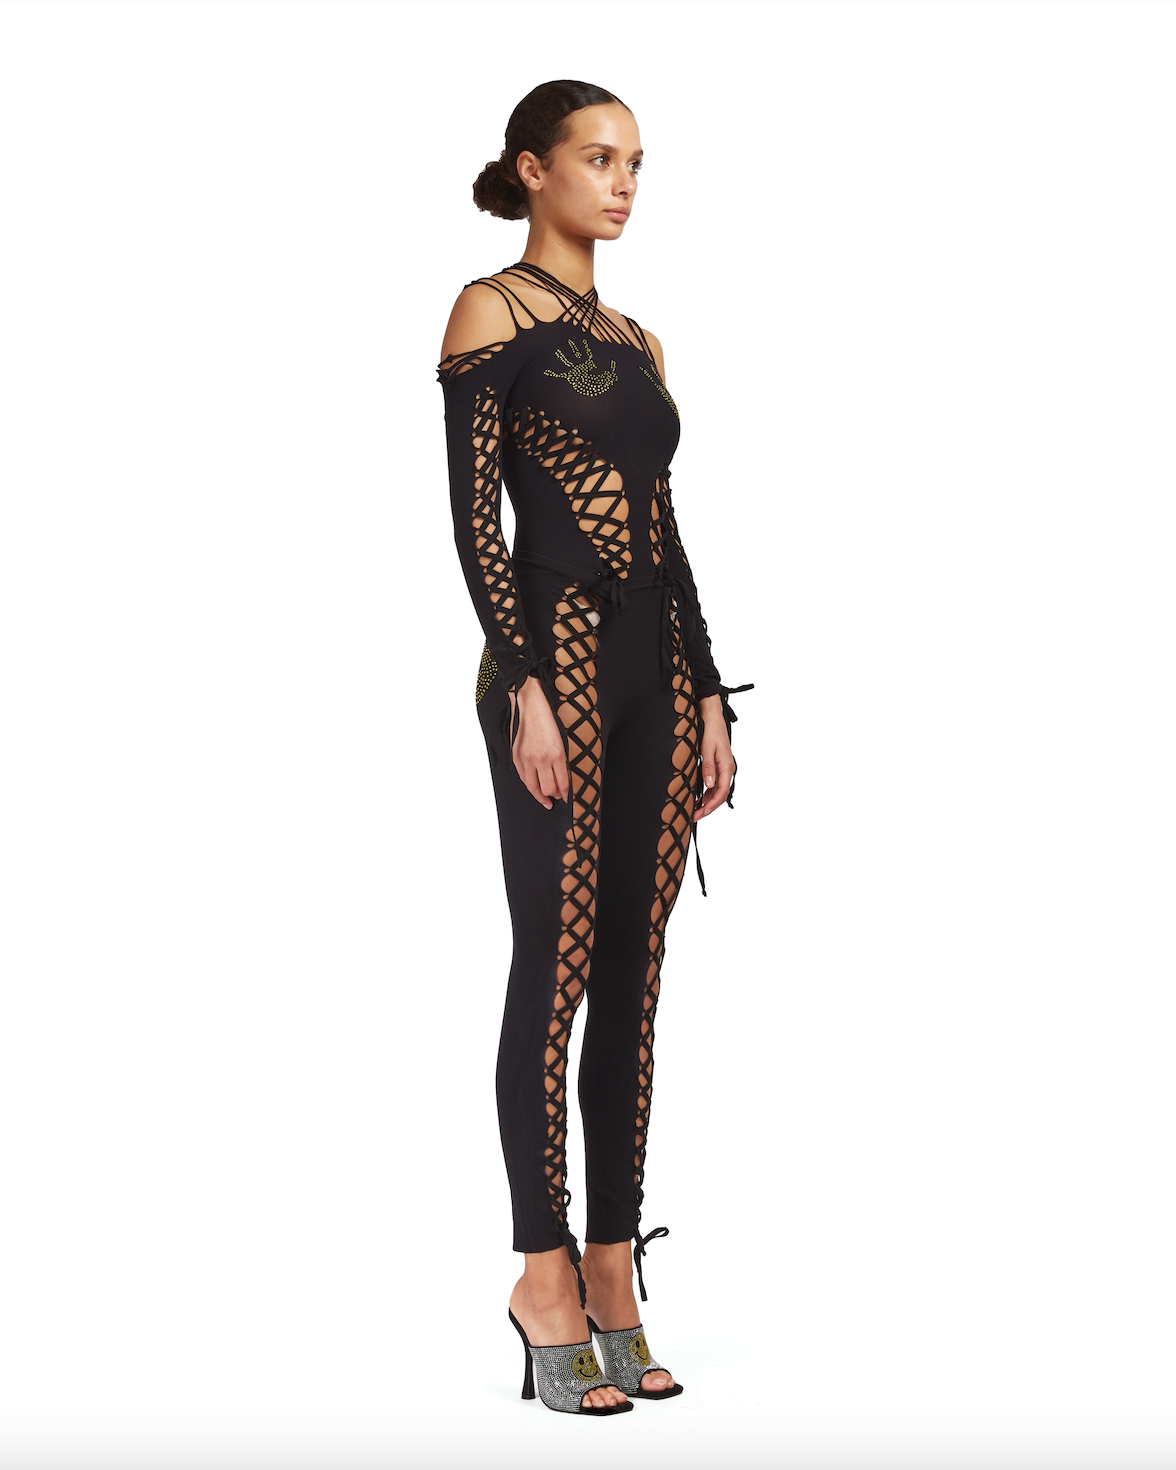 Seamless leggings with lace up detailing and rhinestone hand-prints